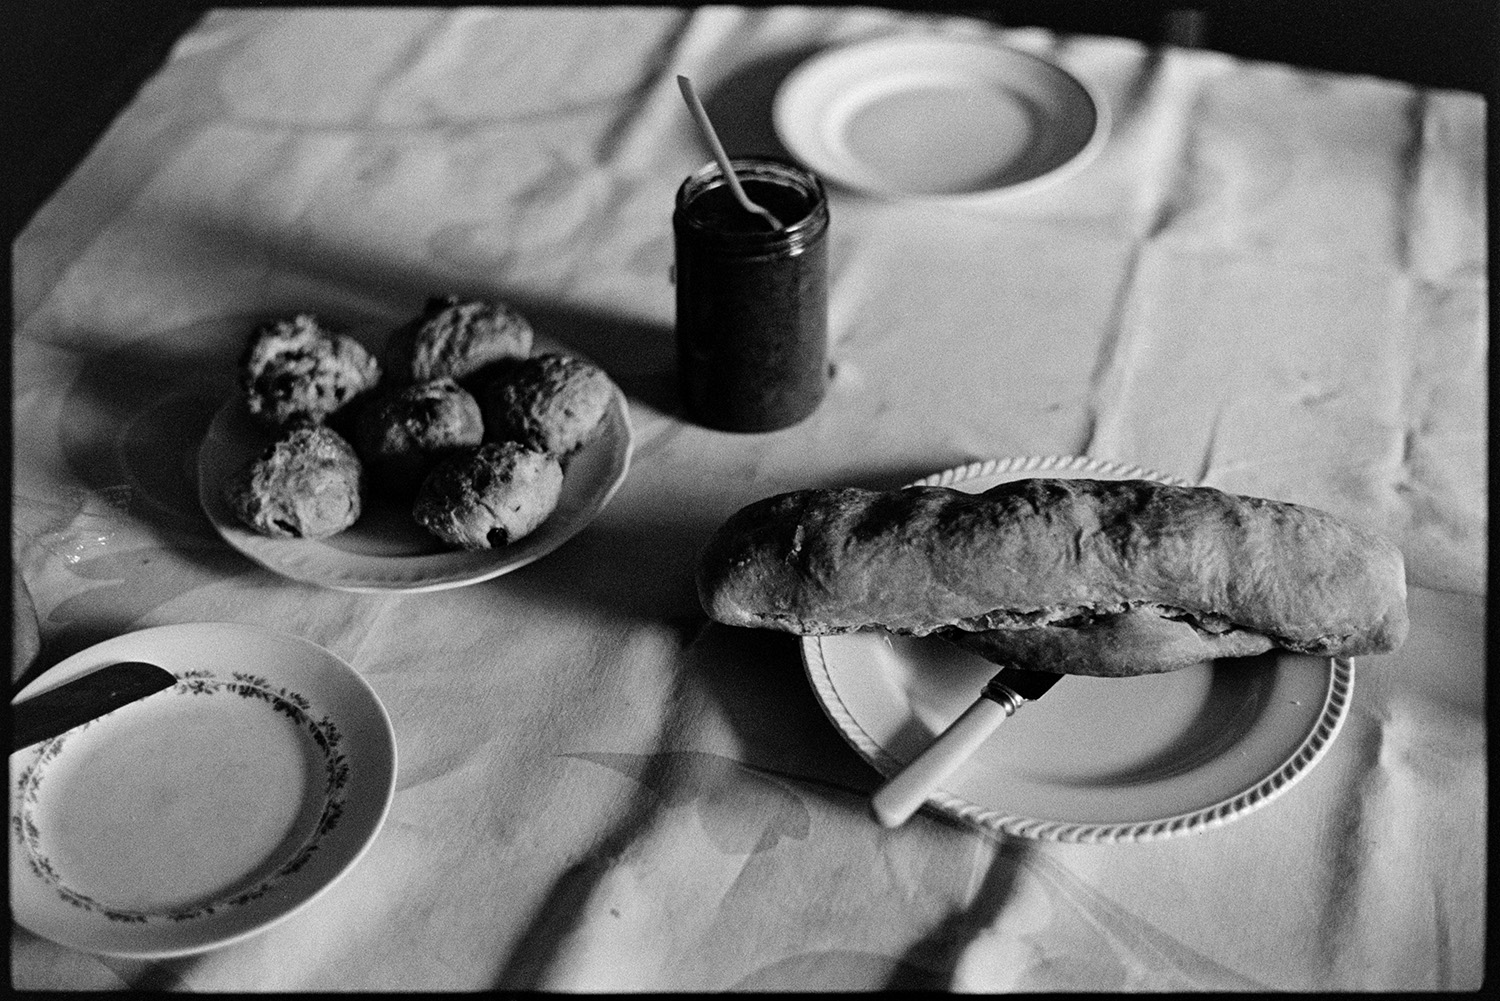 Home made bread, buns and pickle on table. 
[Norah Maynard's homemade bread, cakes or scones and pickle on a table in her house in Atherington.]